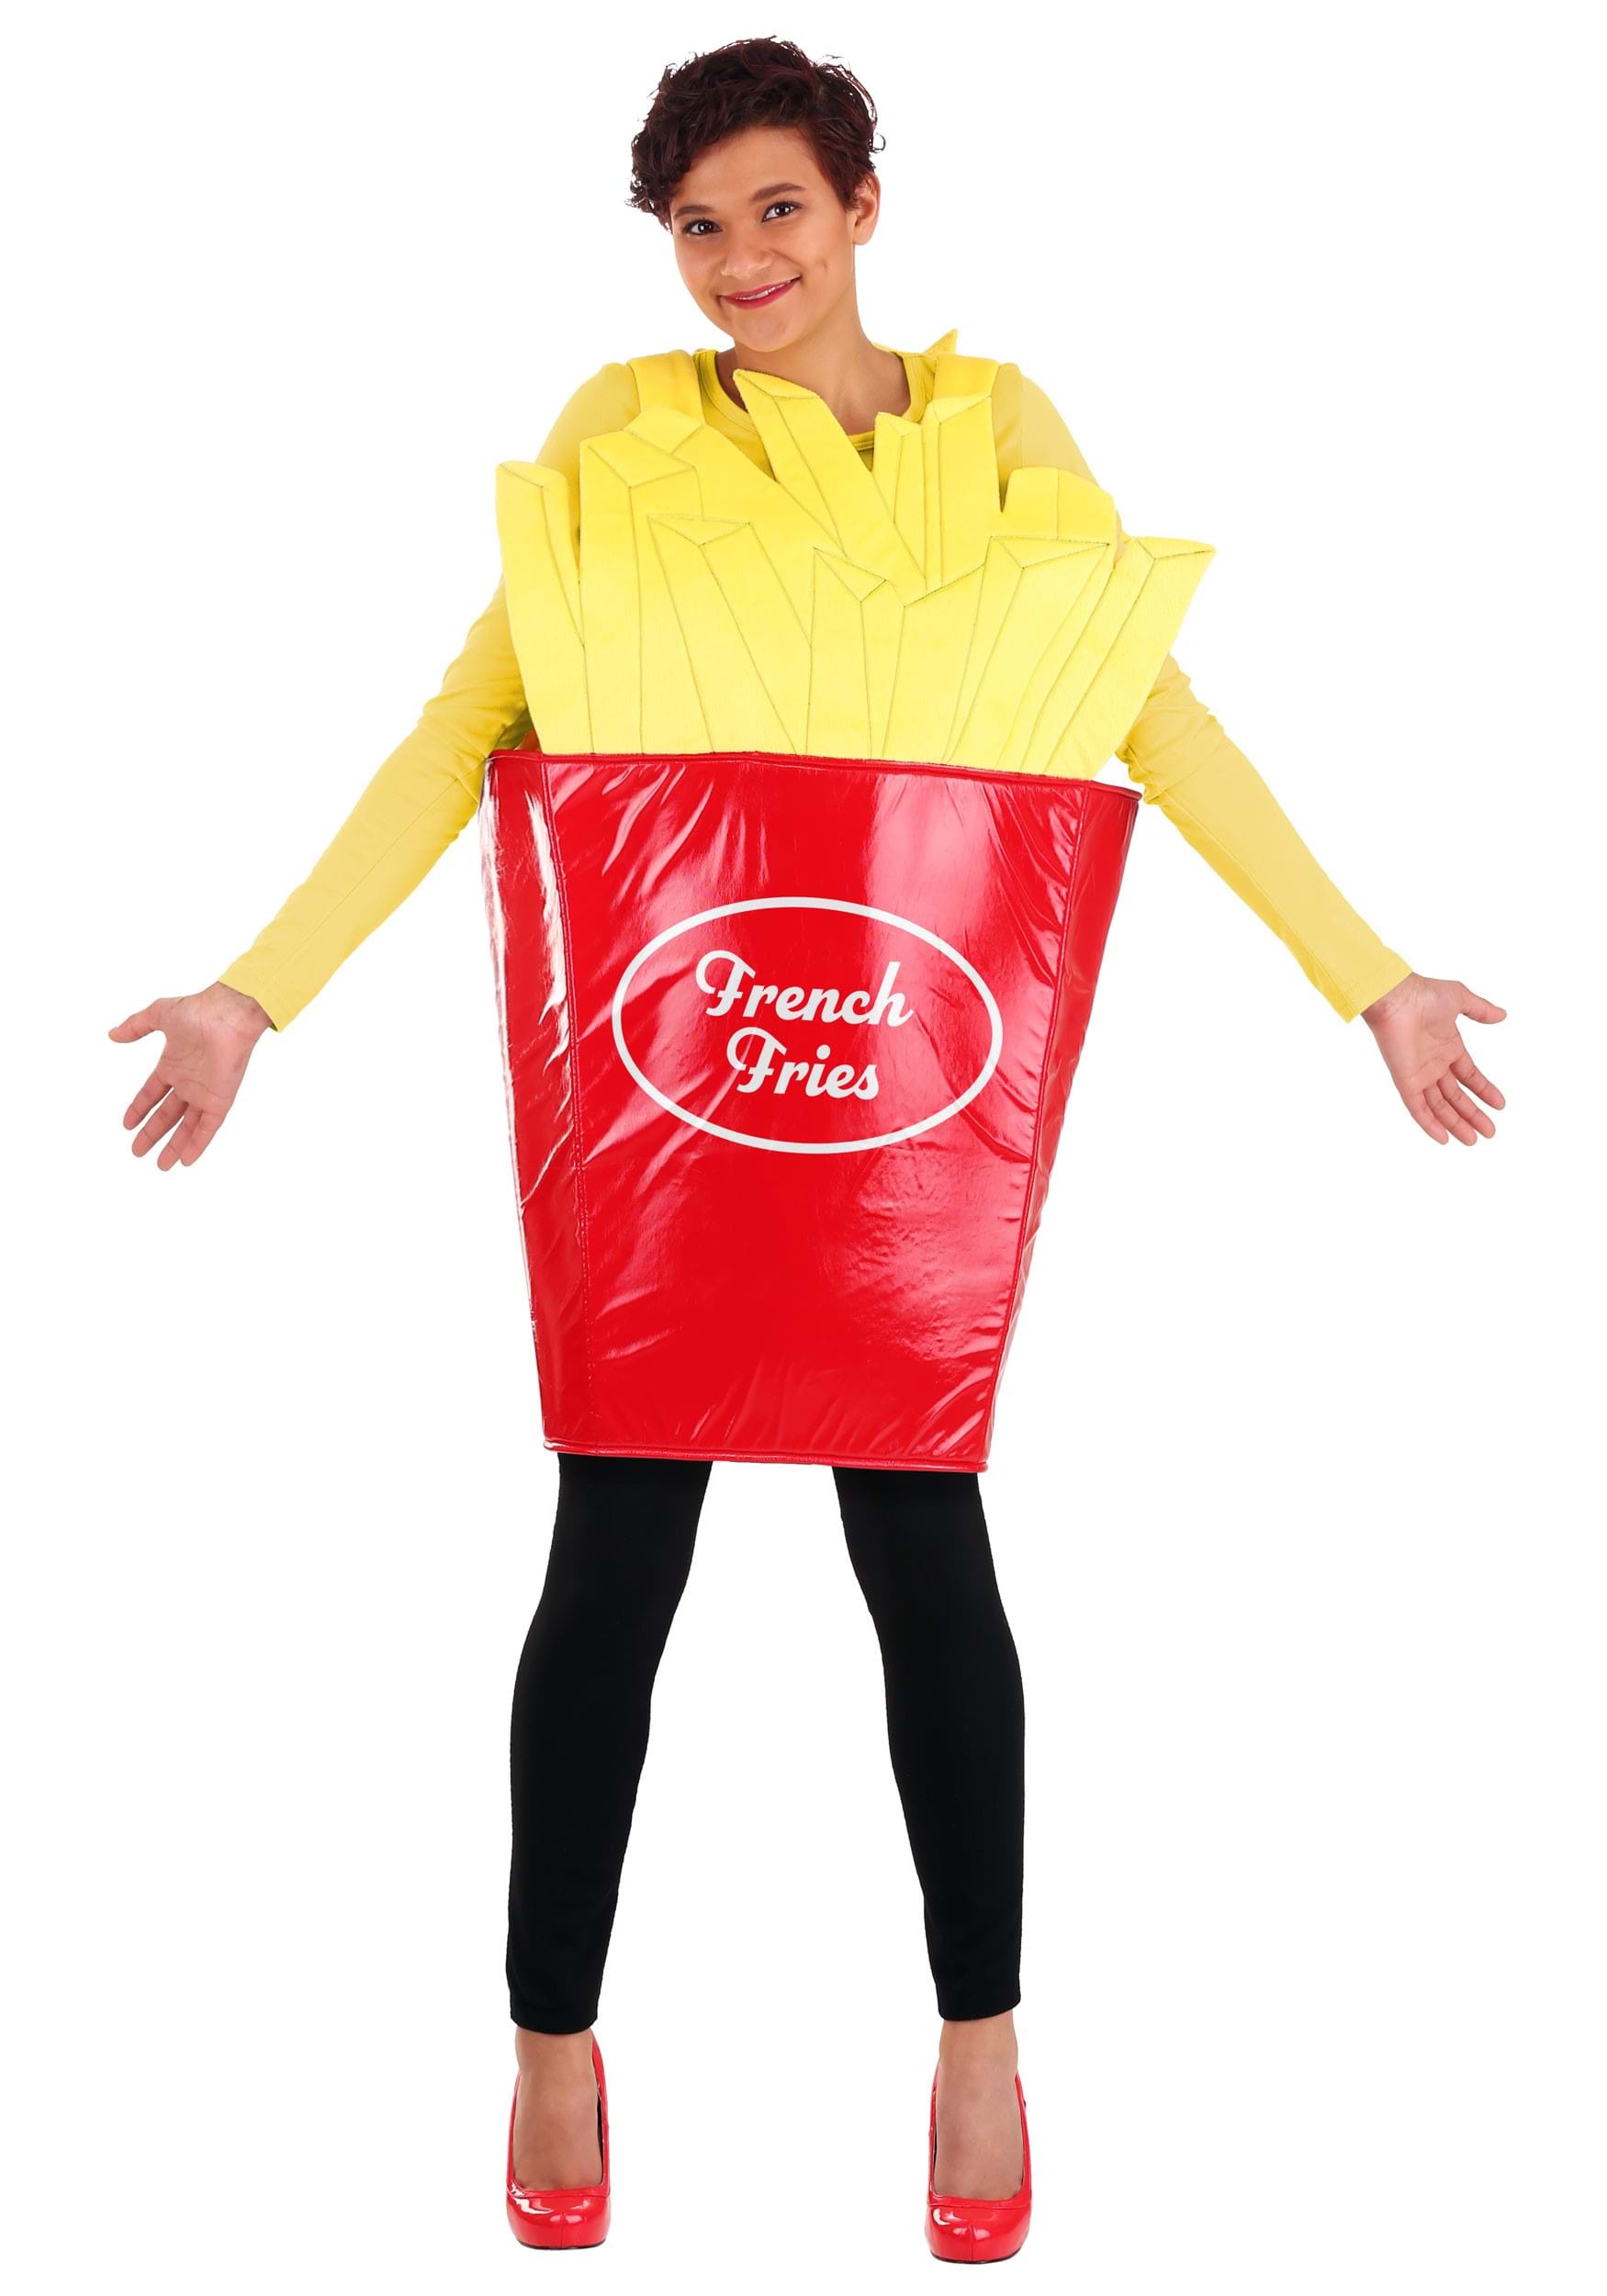 Fast Food Fries Costume for Adults